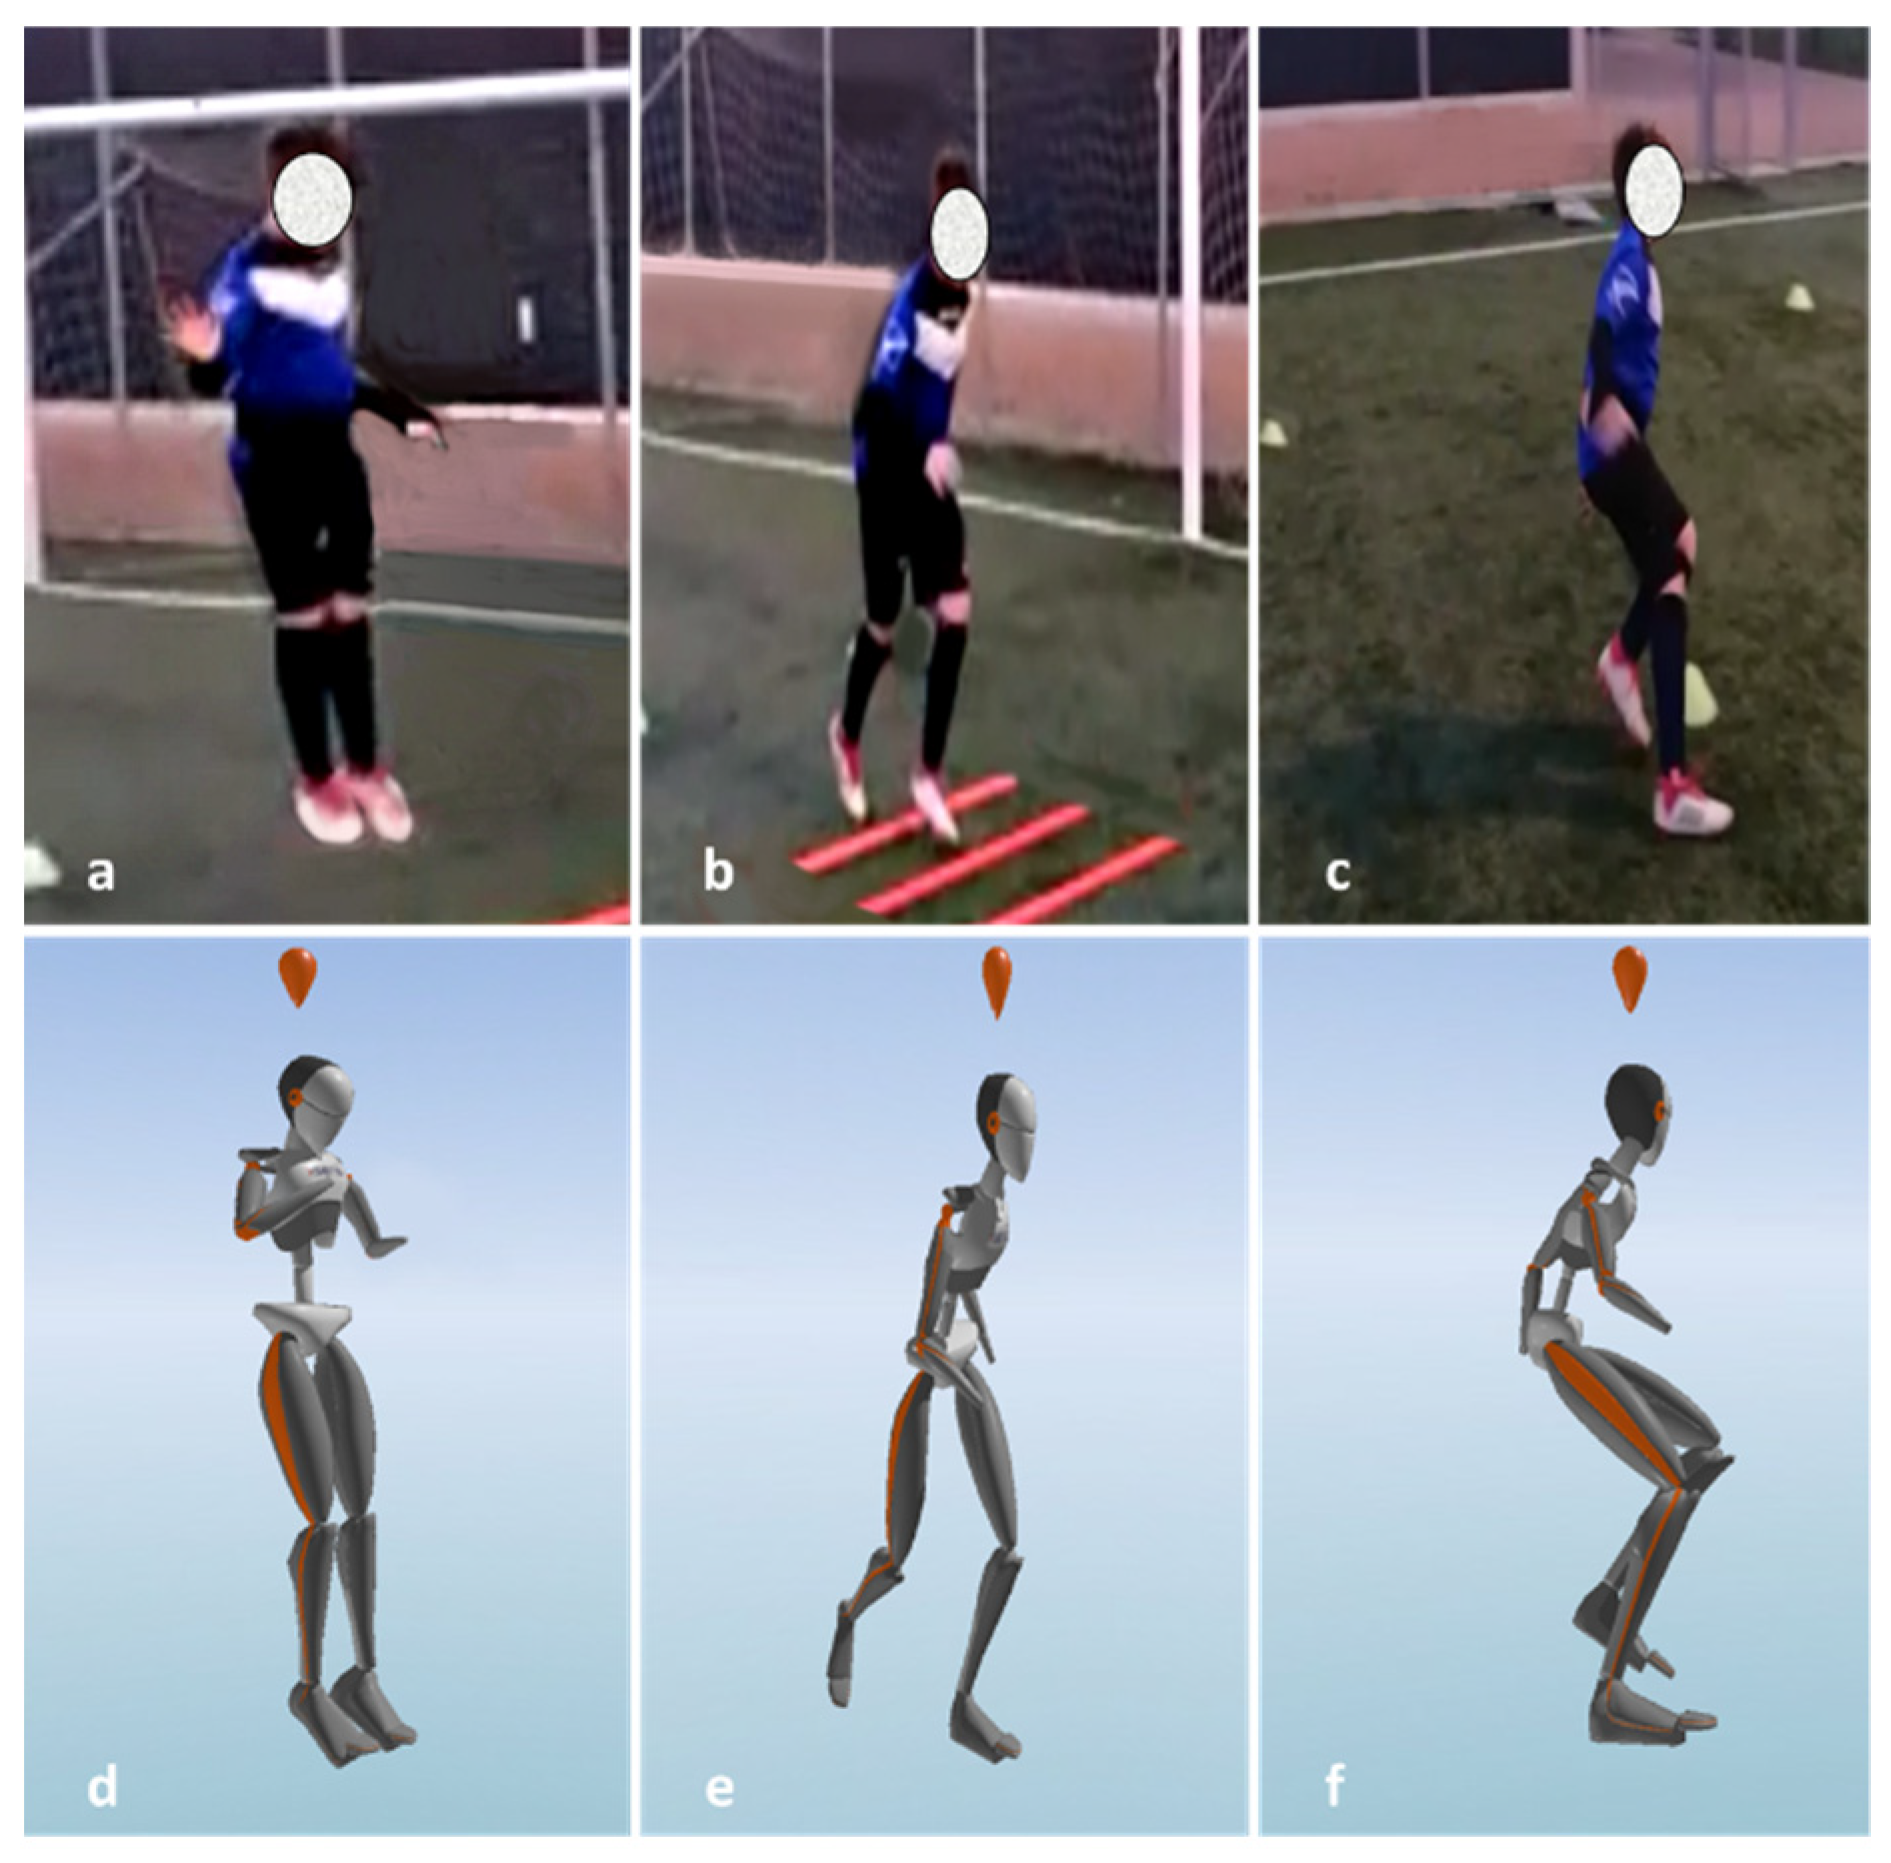 Sensors Free Full Text Poor Motor Coordination Elicits Altered Lower Limb Biomechanics In Young Football Soccer Players Implications For Injury Prevention Through Wearable Sensors Html